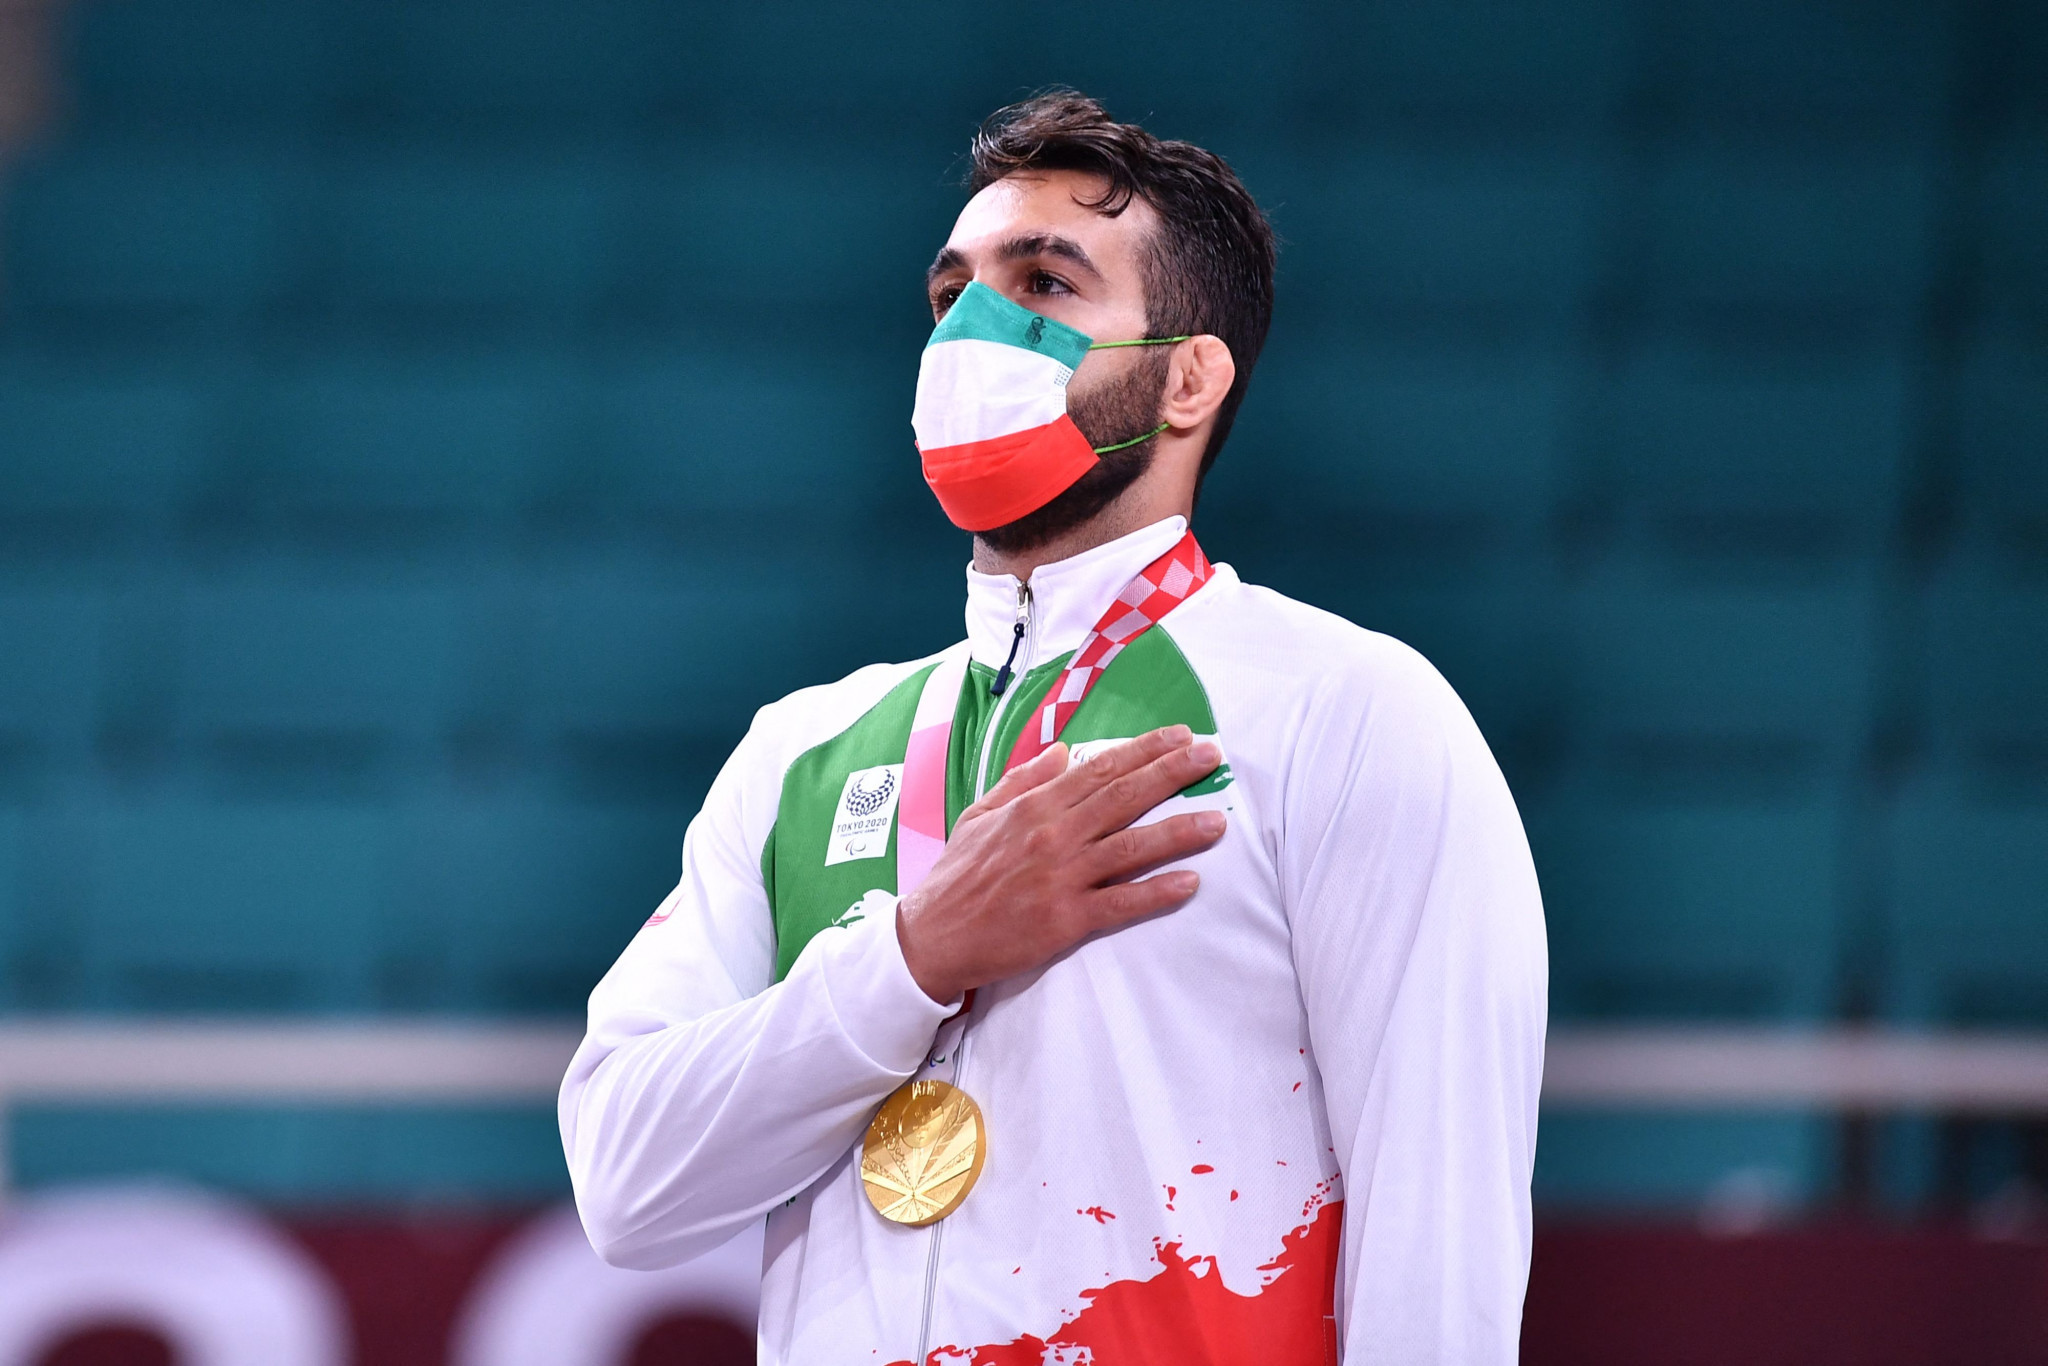 Tokyo 2020 Paralympic gold medallist Vahid Nouri of Iran was among the winners at the IBSA Judo Grand Prix in Nur-Sultan ©Getty Images